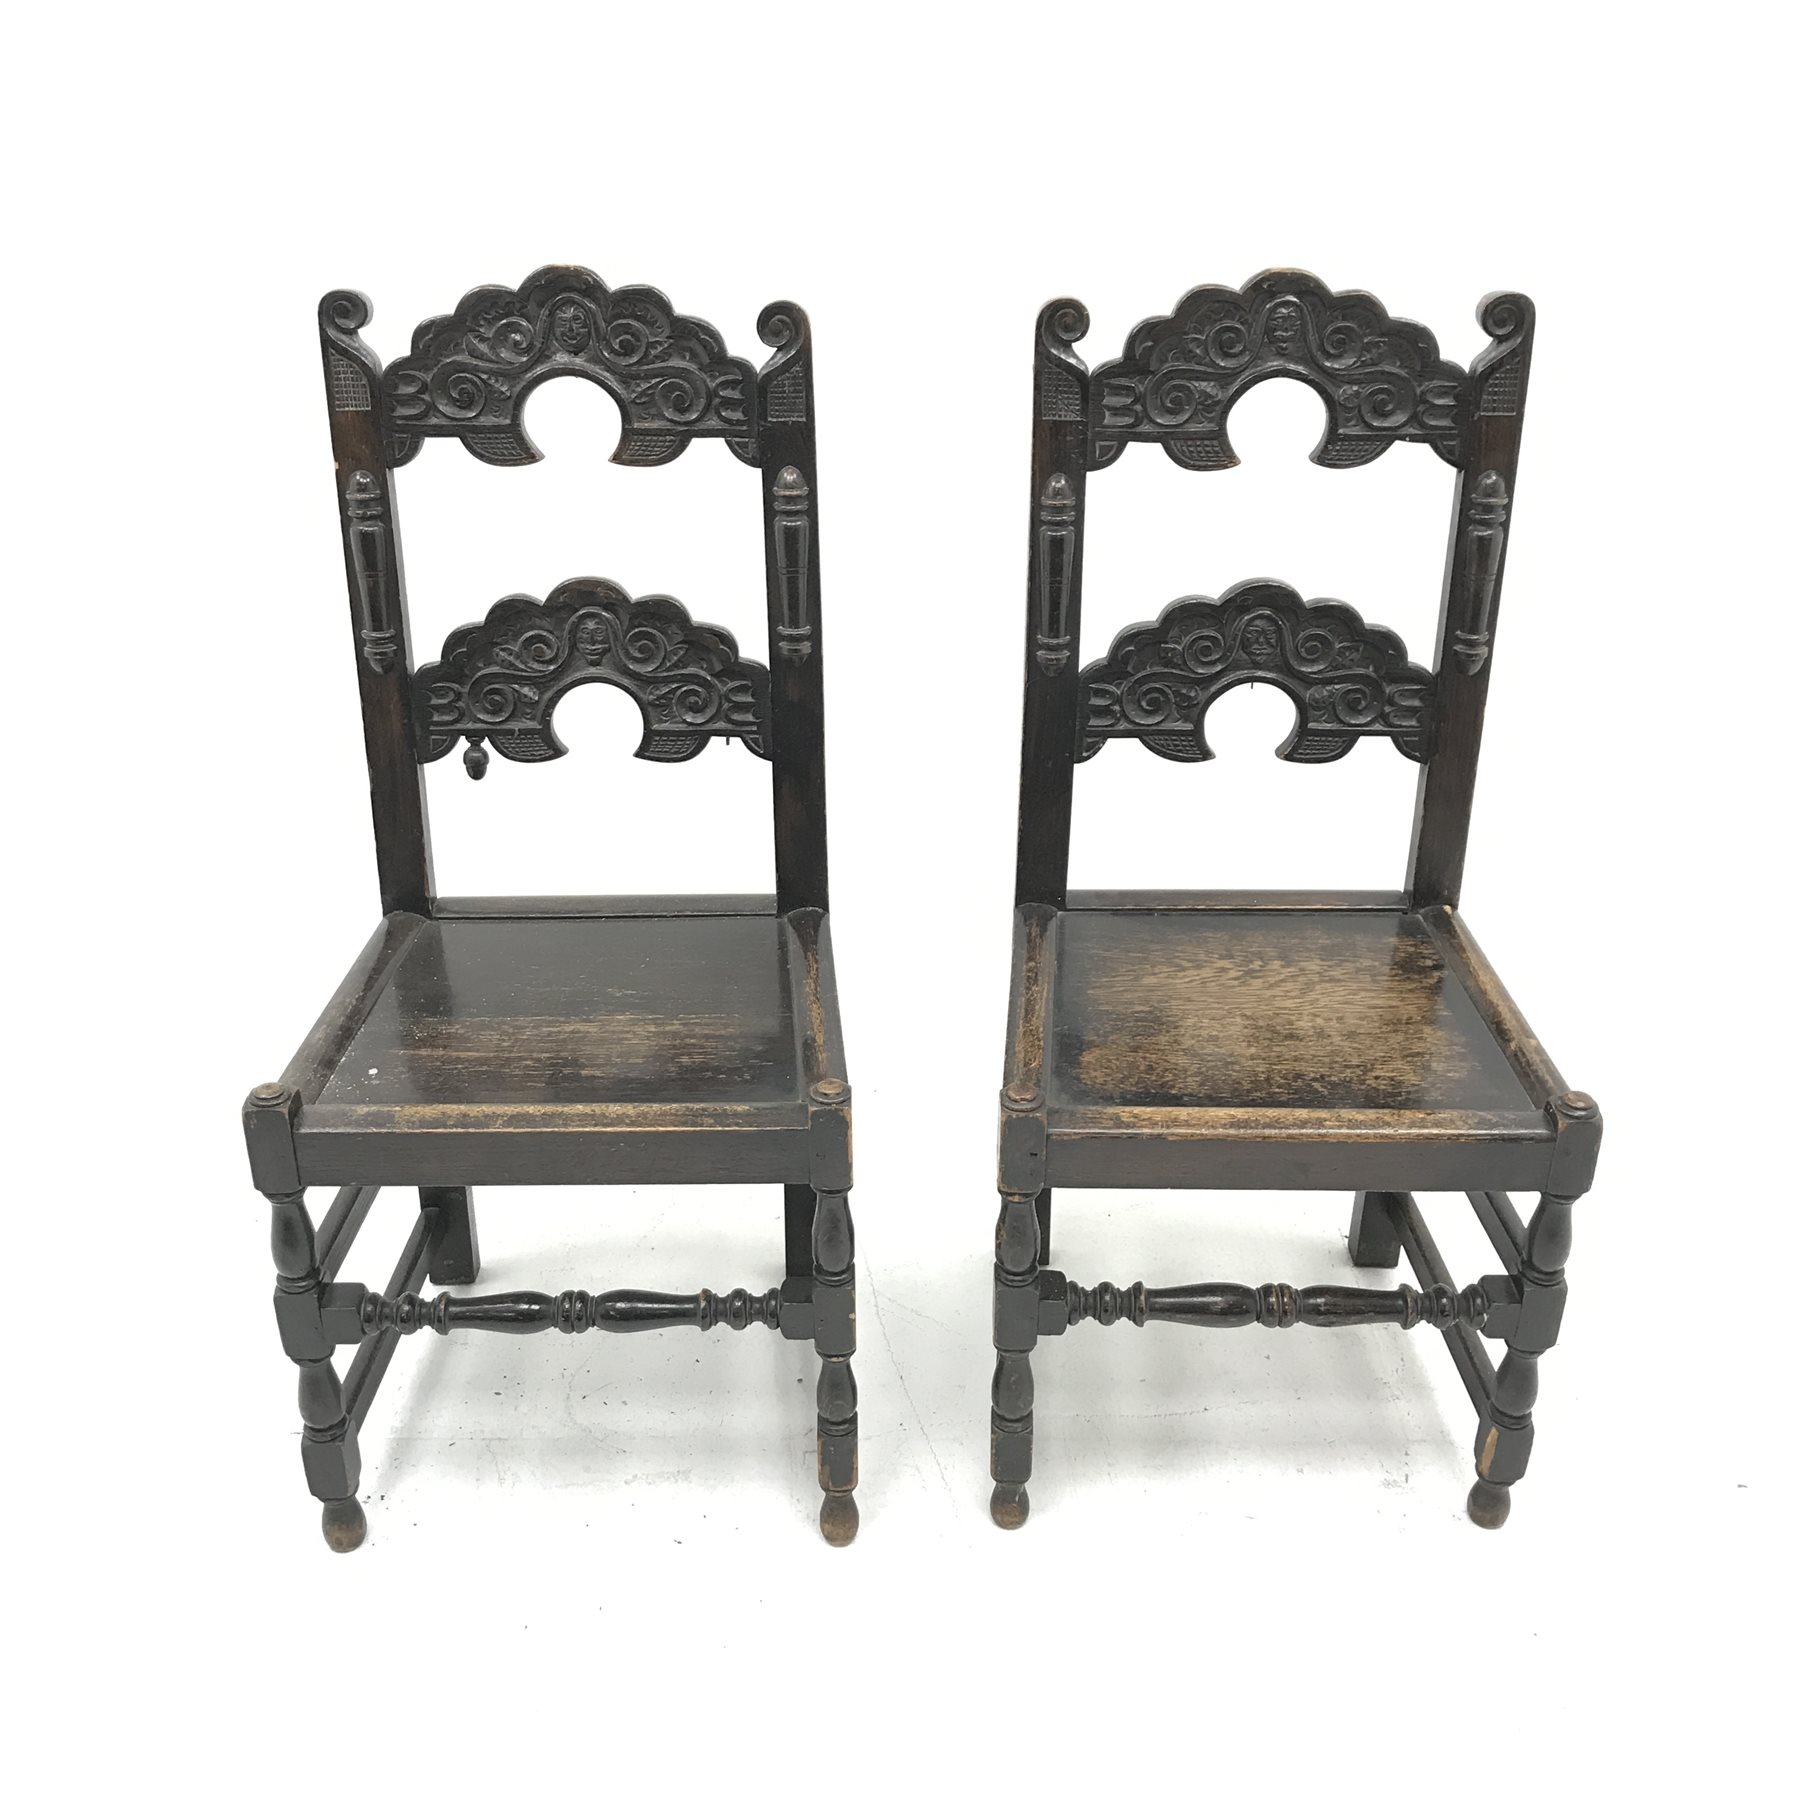 Pair 19th century Yorkshire/Derbyshire type oak hall chairs, detailed carved backs, solid seats, W50 - Image 2 of 4